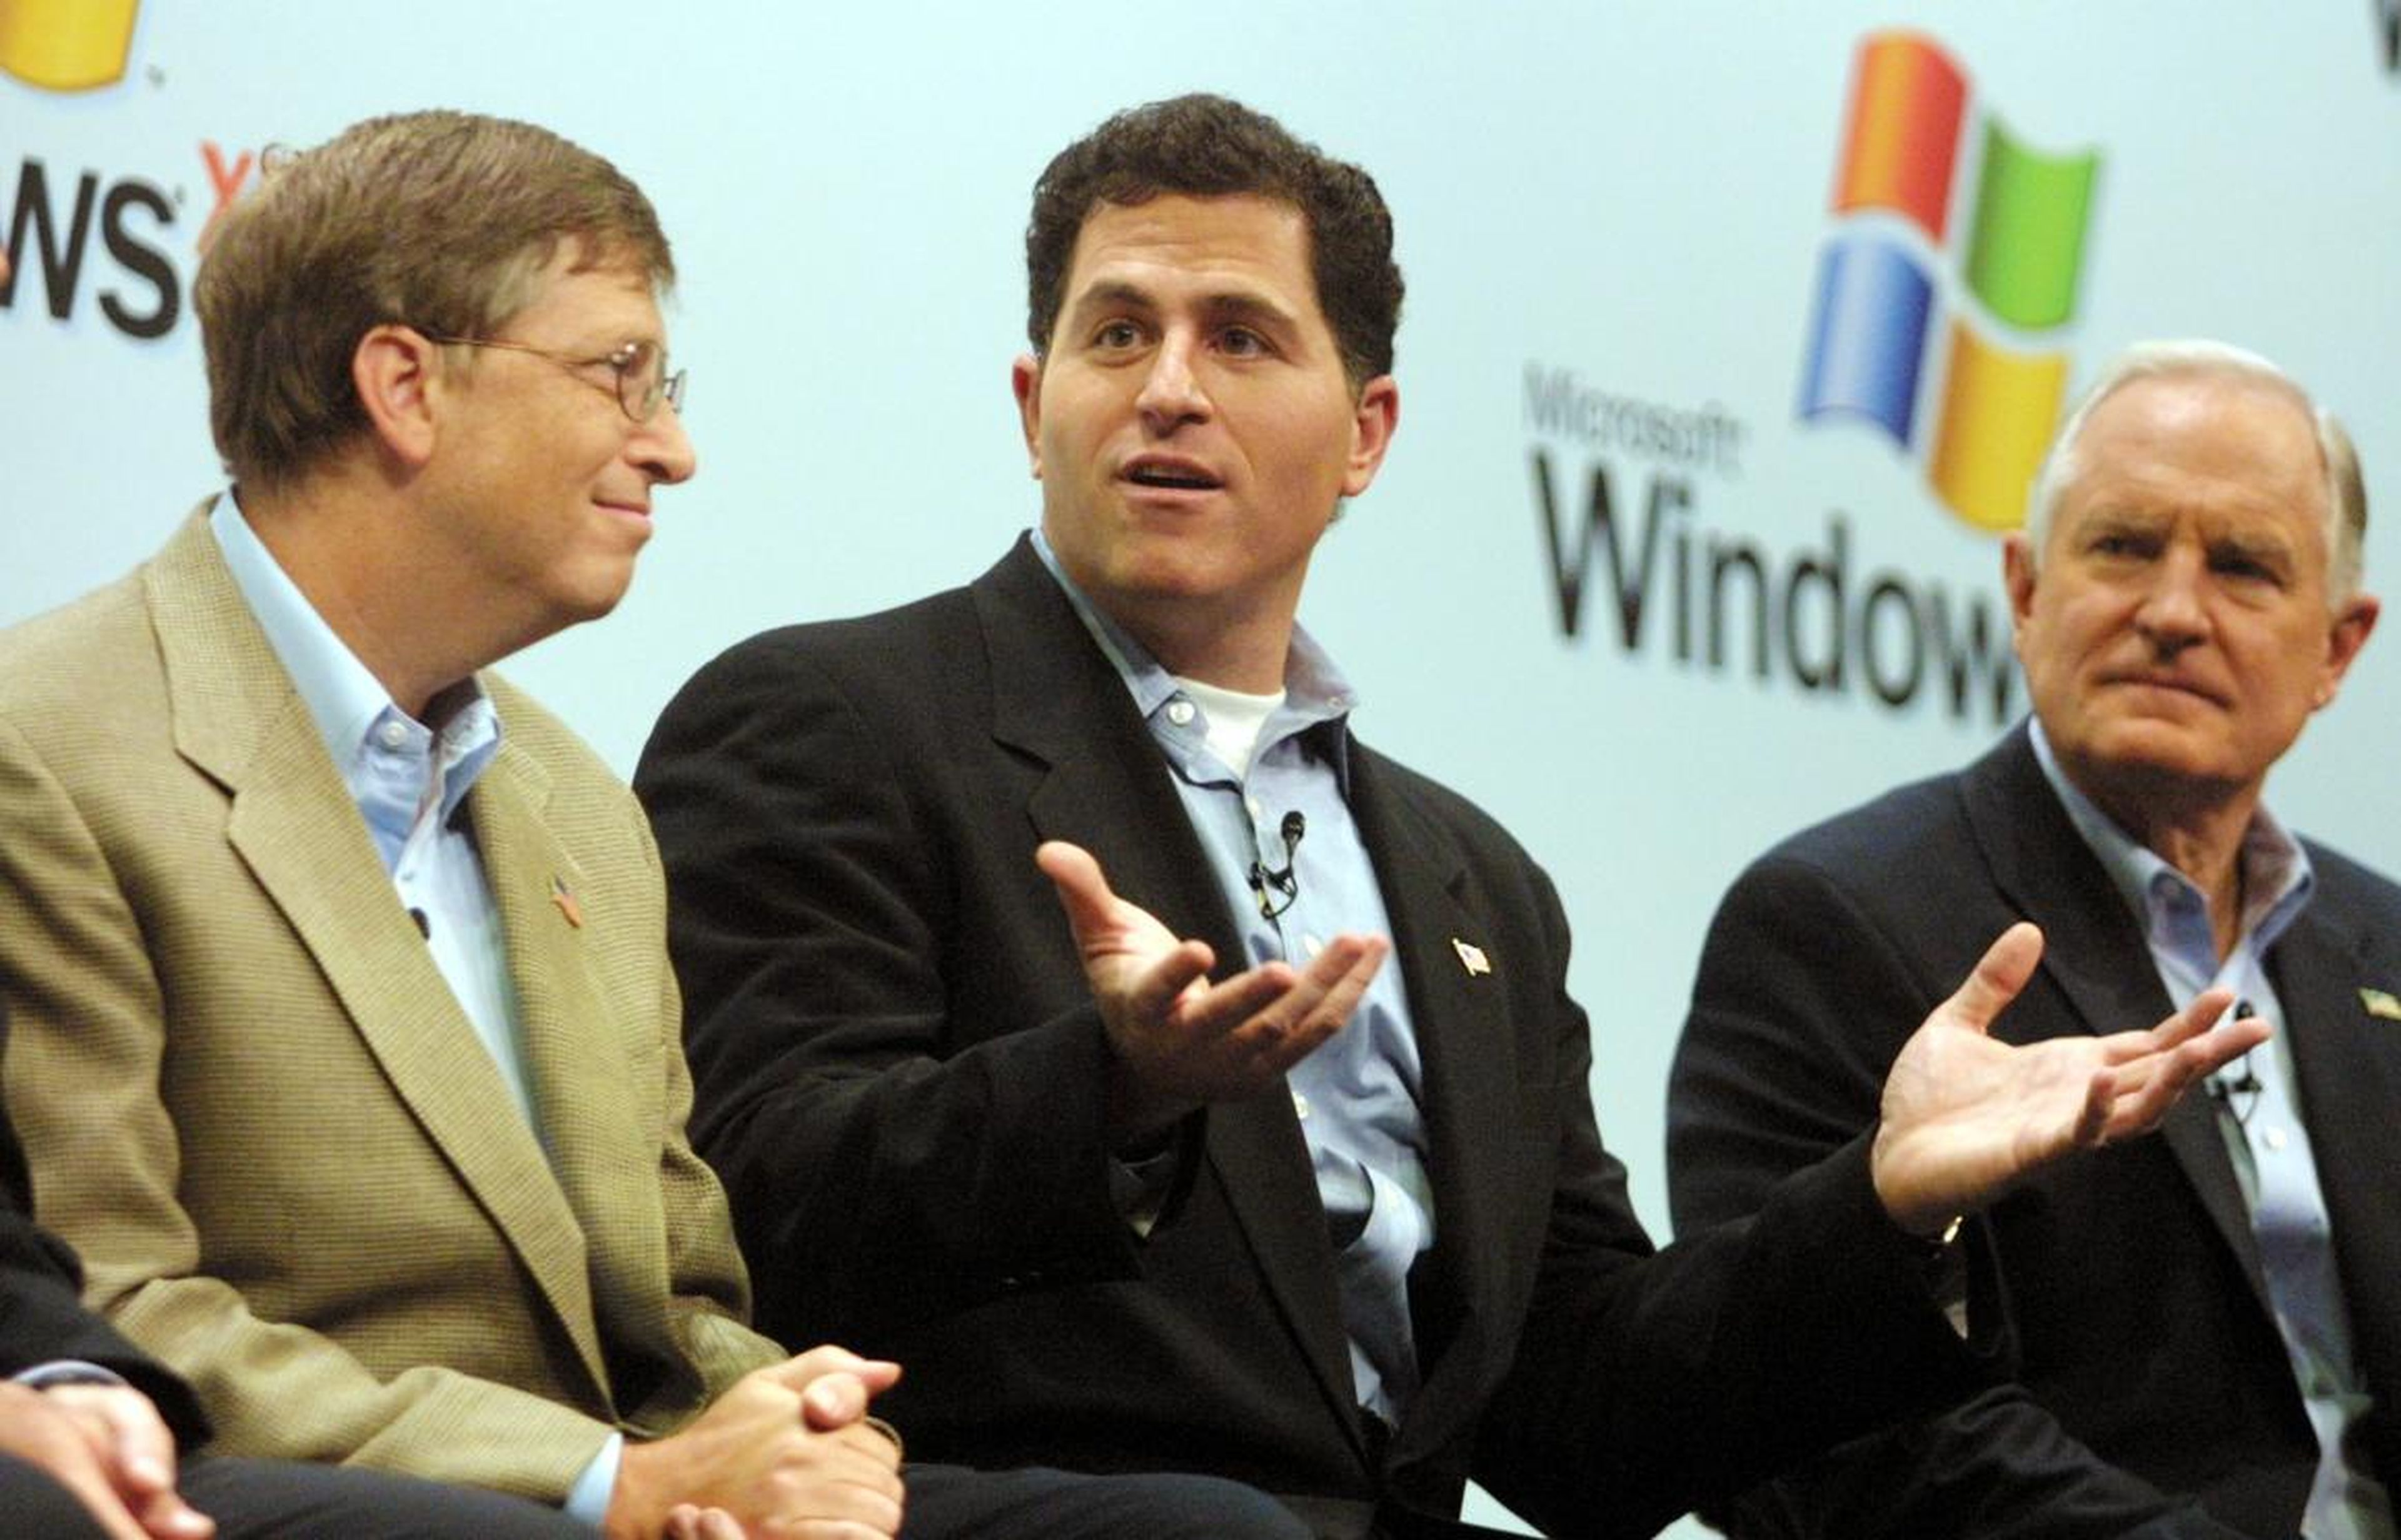 In fact, by 1997, Apple's financial situation was so dire that Dell CEO and founder Michael Dell, one of Microsoft's biggest partners, once said that if he were in Jobs' shoes, he'd "shut it down and give the money back to the